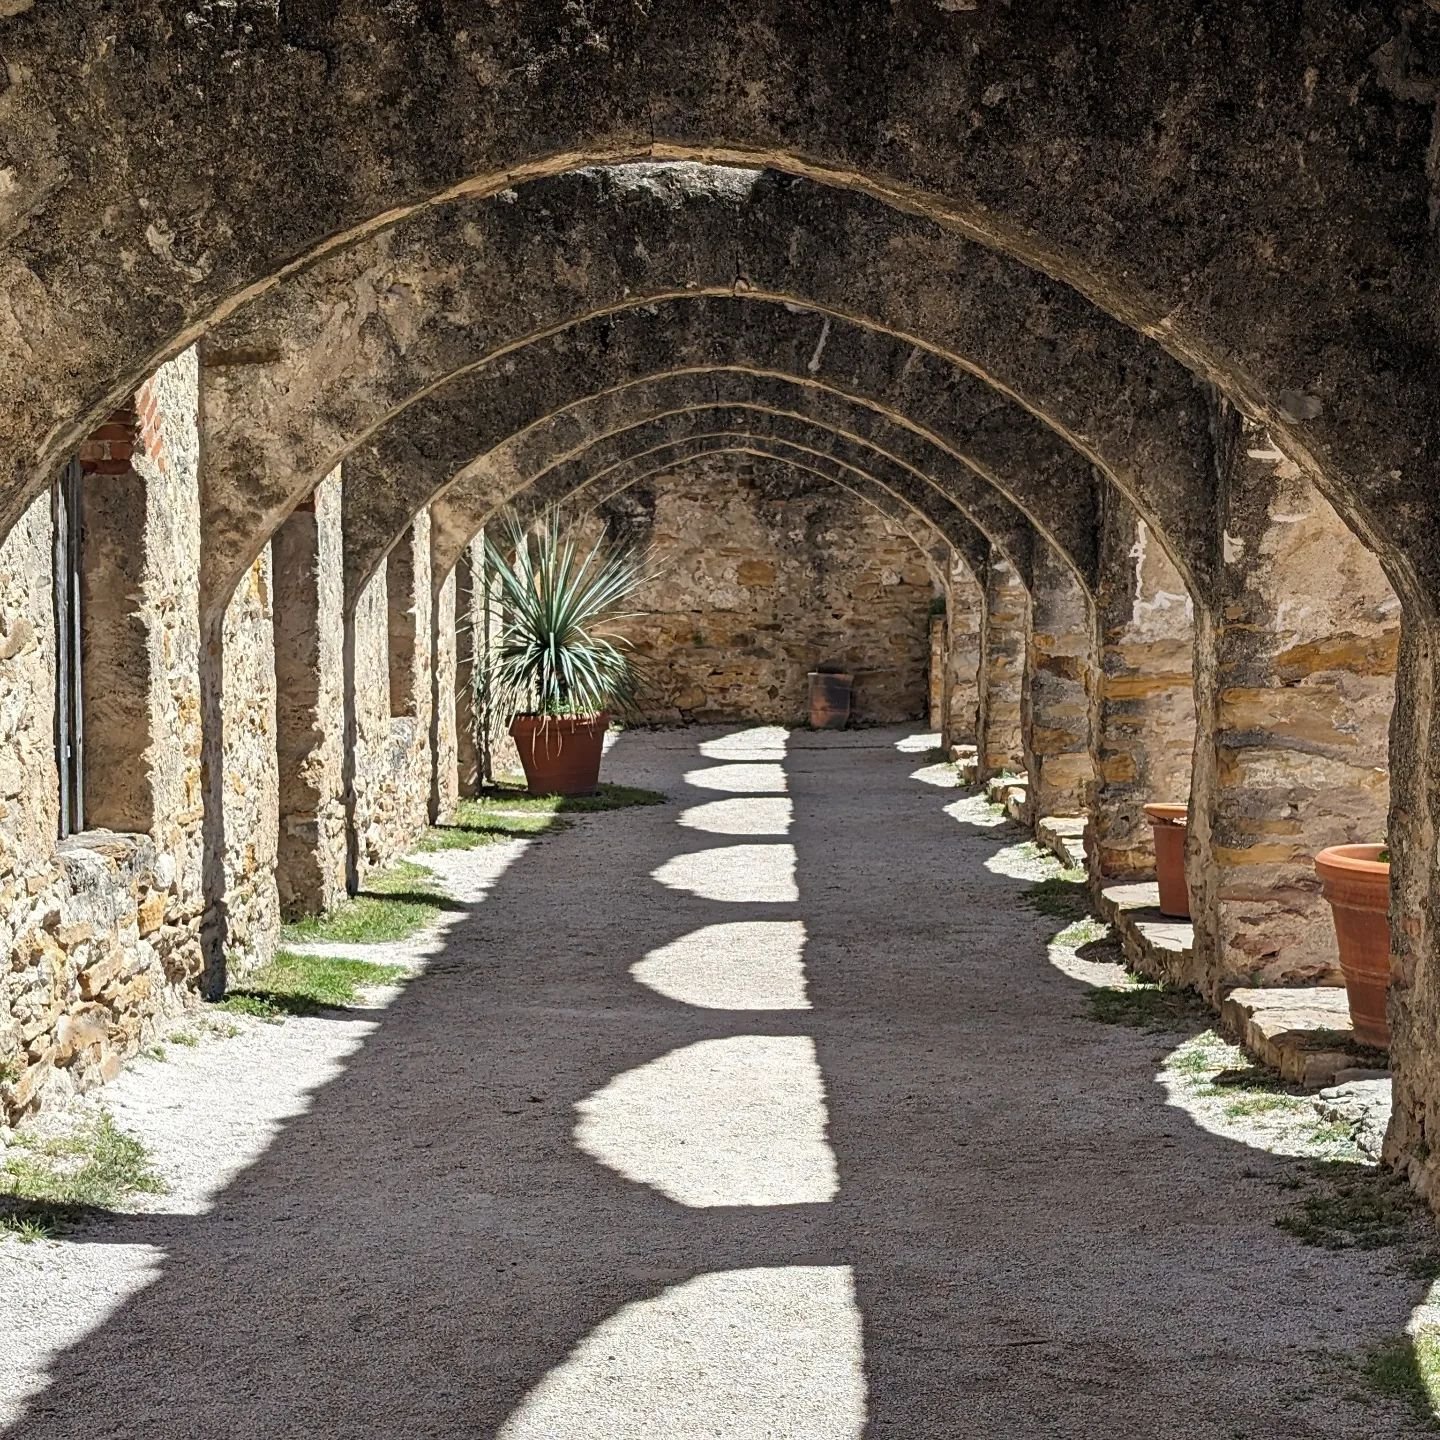 Just a cool outdoor area at Mission San Jose, in San Antonio, Texas